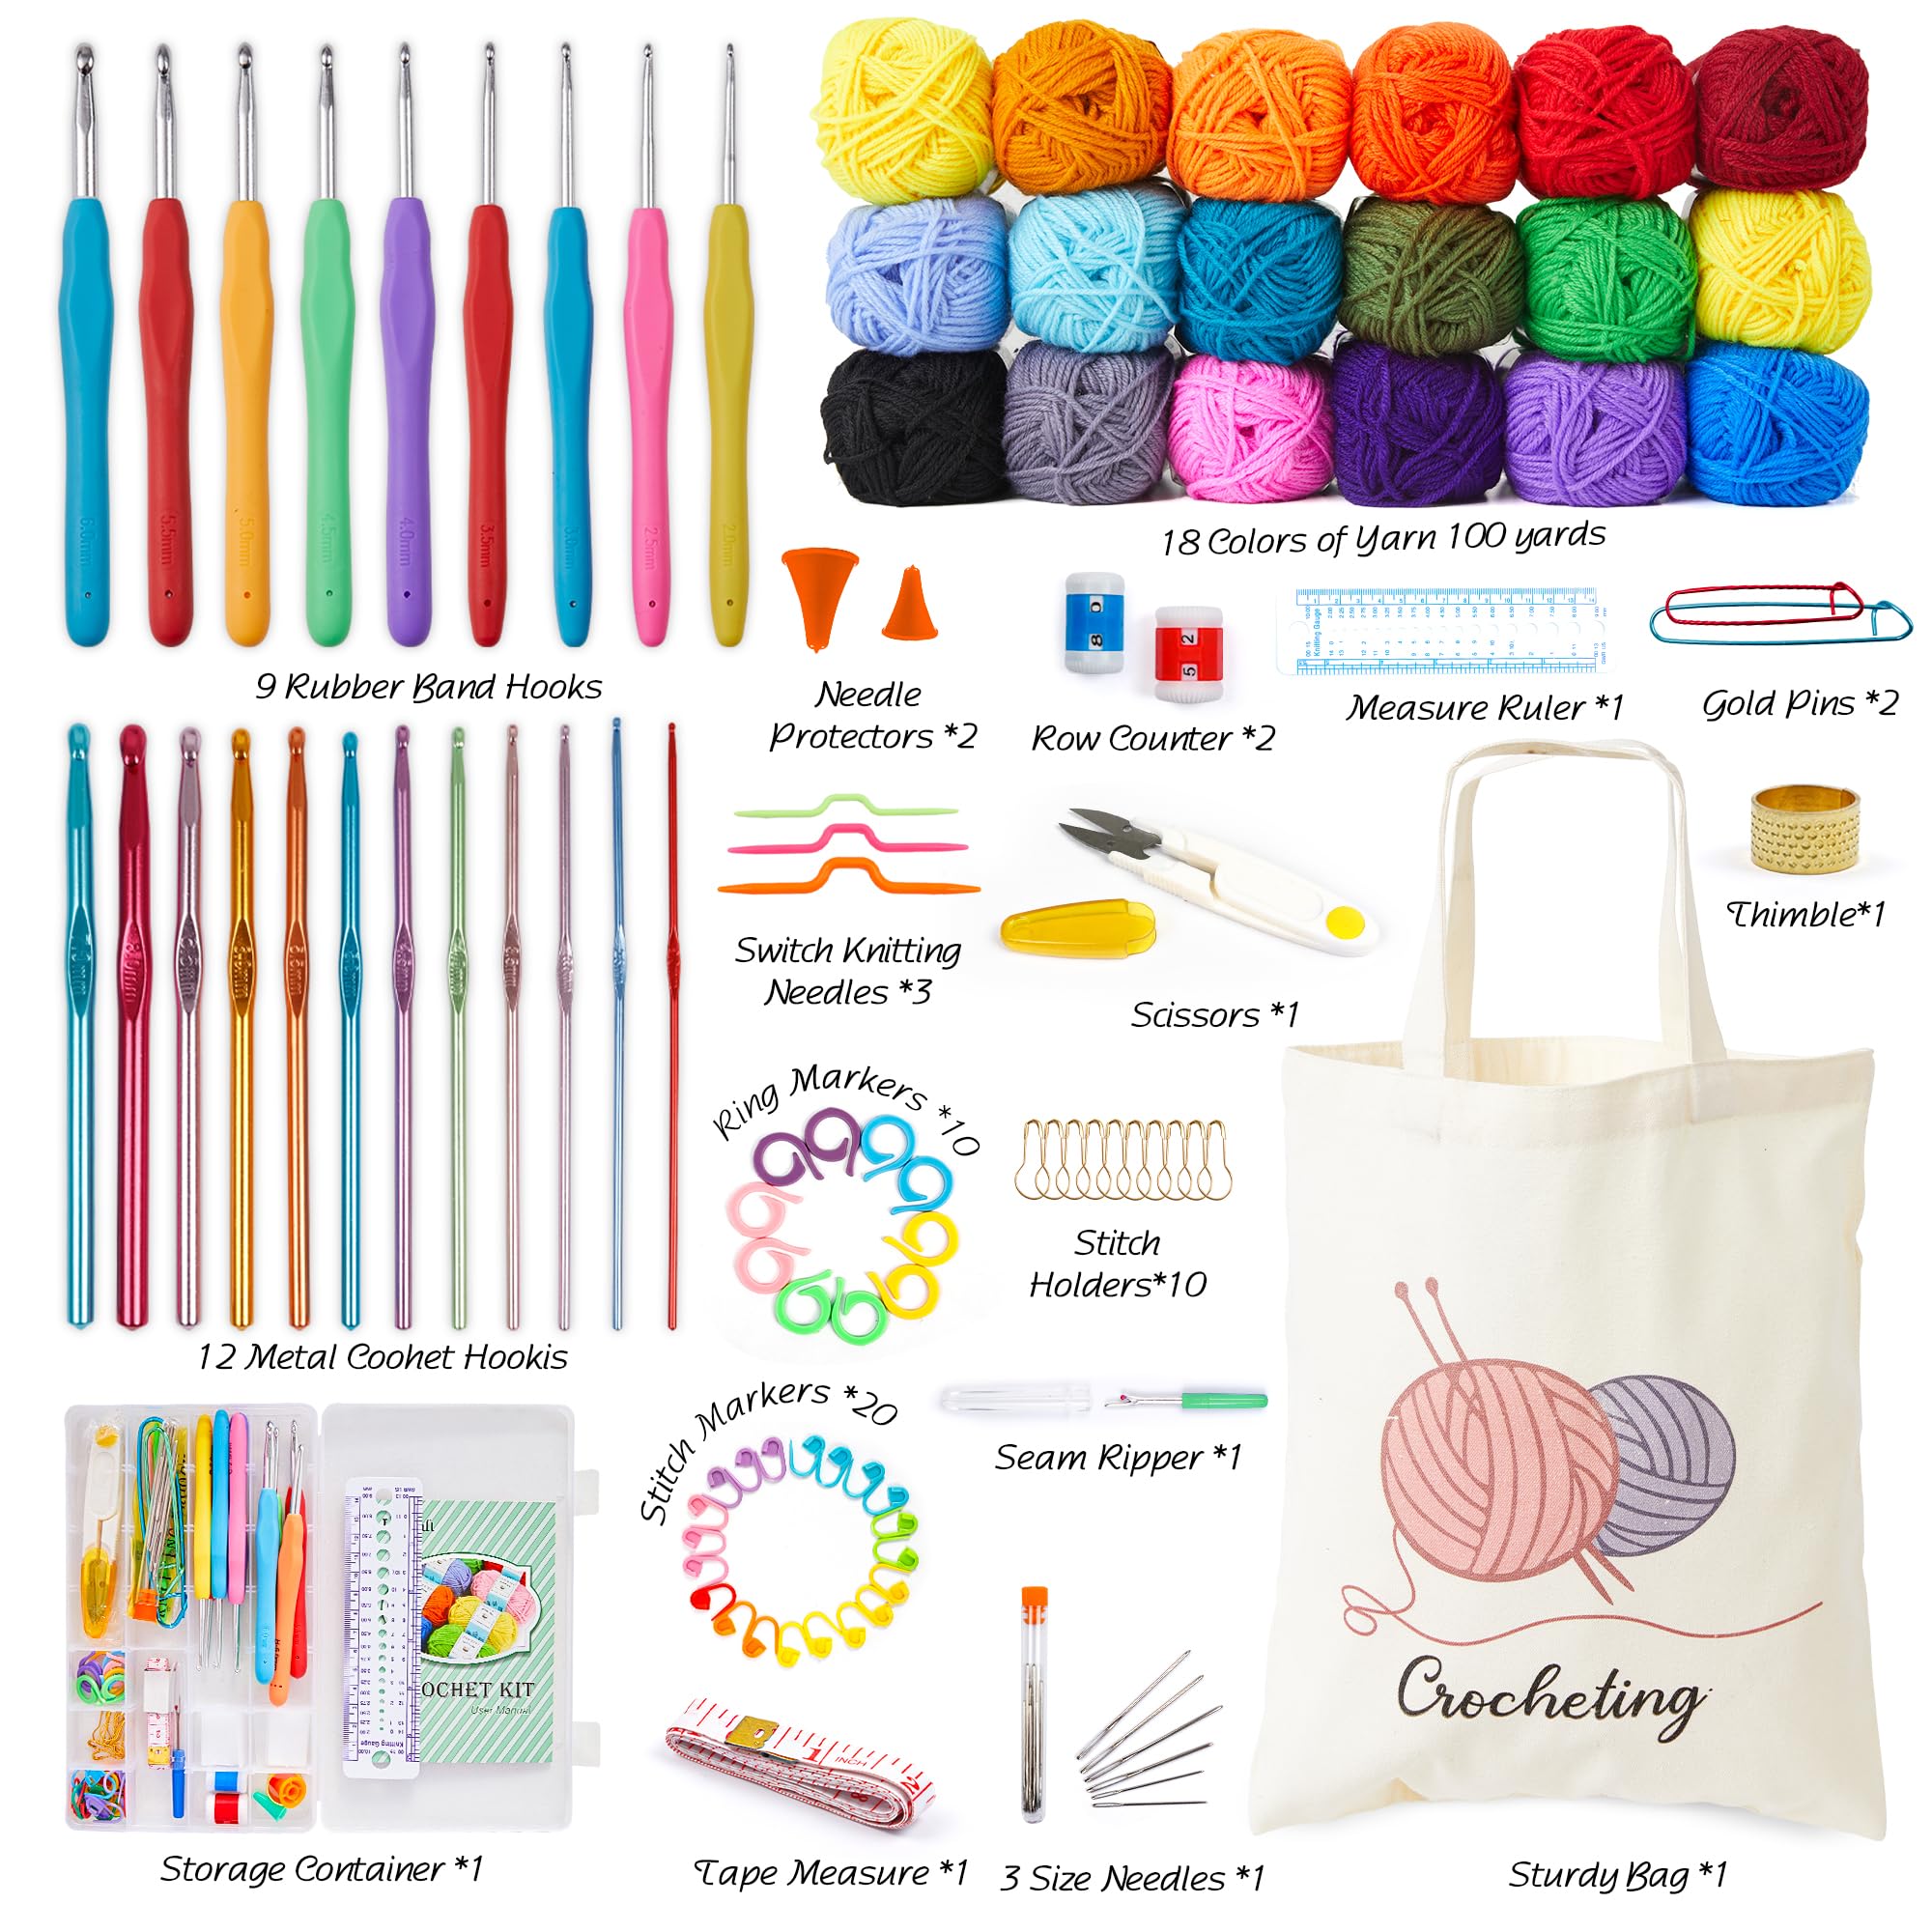 INSCRAFT Crochet Kit for Beginners Adults, 18 Large Acrylic Yarn Skeins 1800 Yards Yarn, 105 PCS Crochet Kit with Hooks Yarn Set,Includes Canvas Tote Bag, Ideal Starter Pack for Kids Professionals